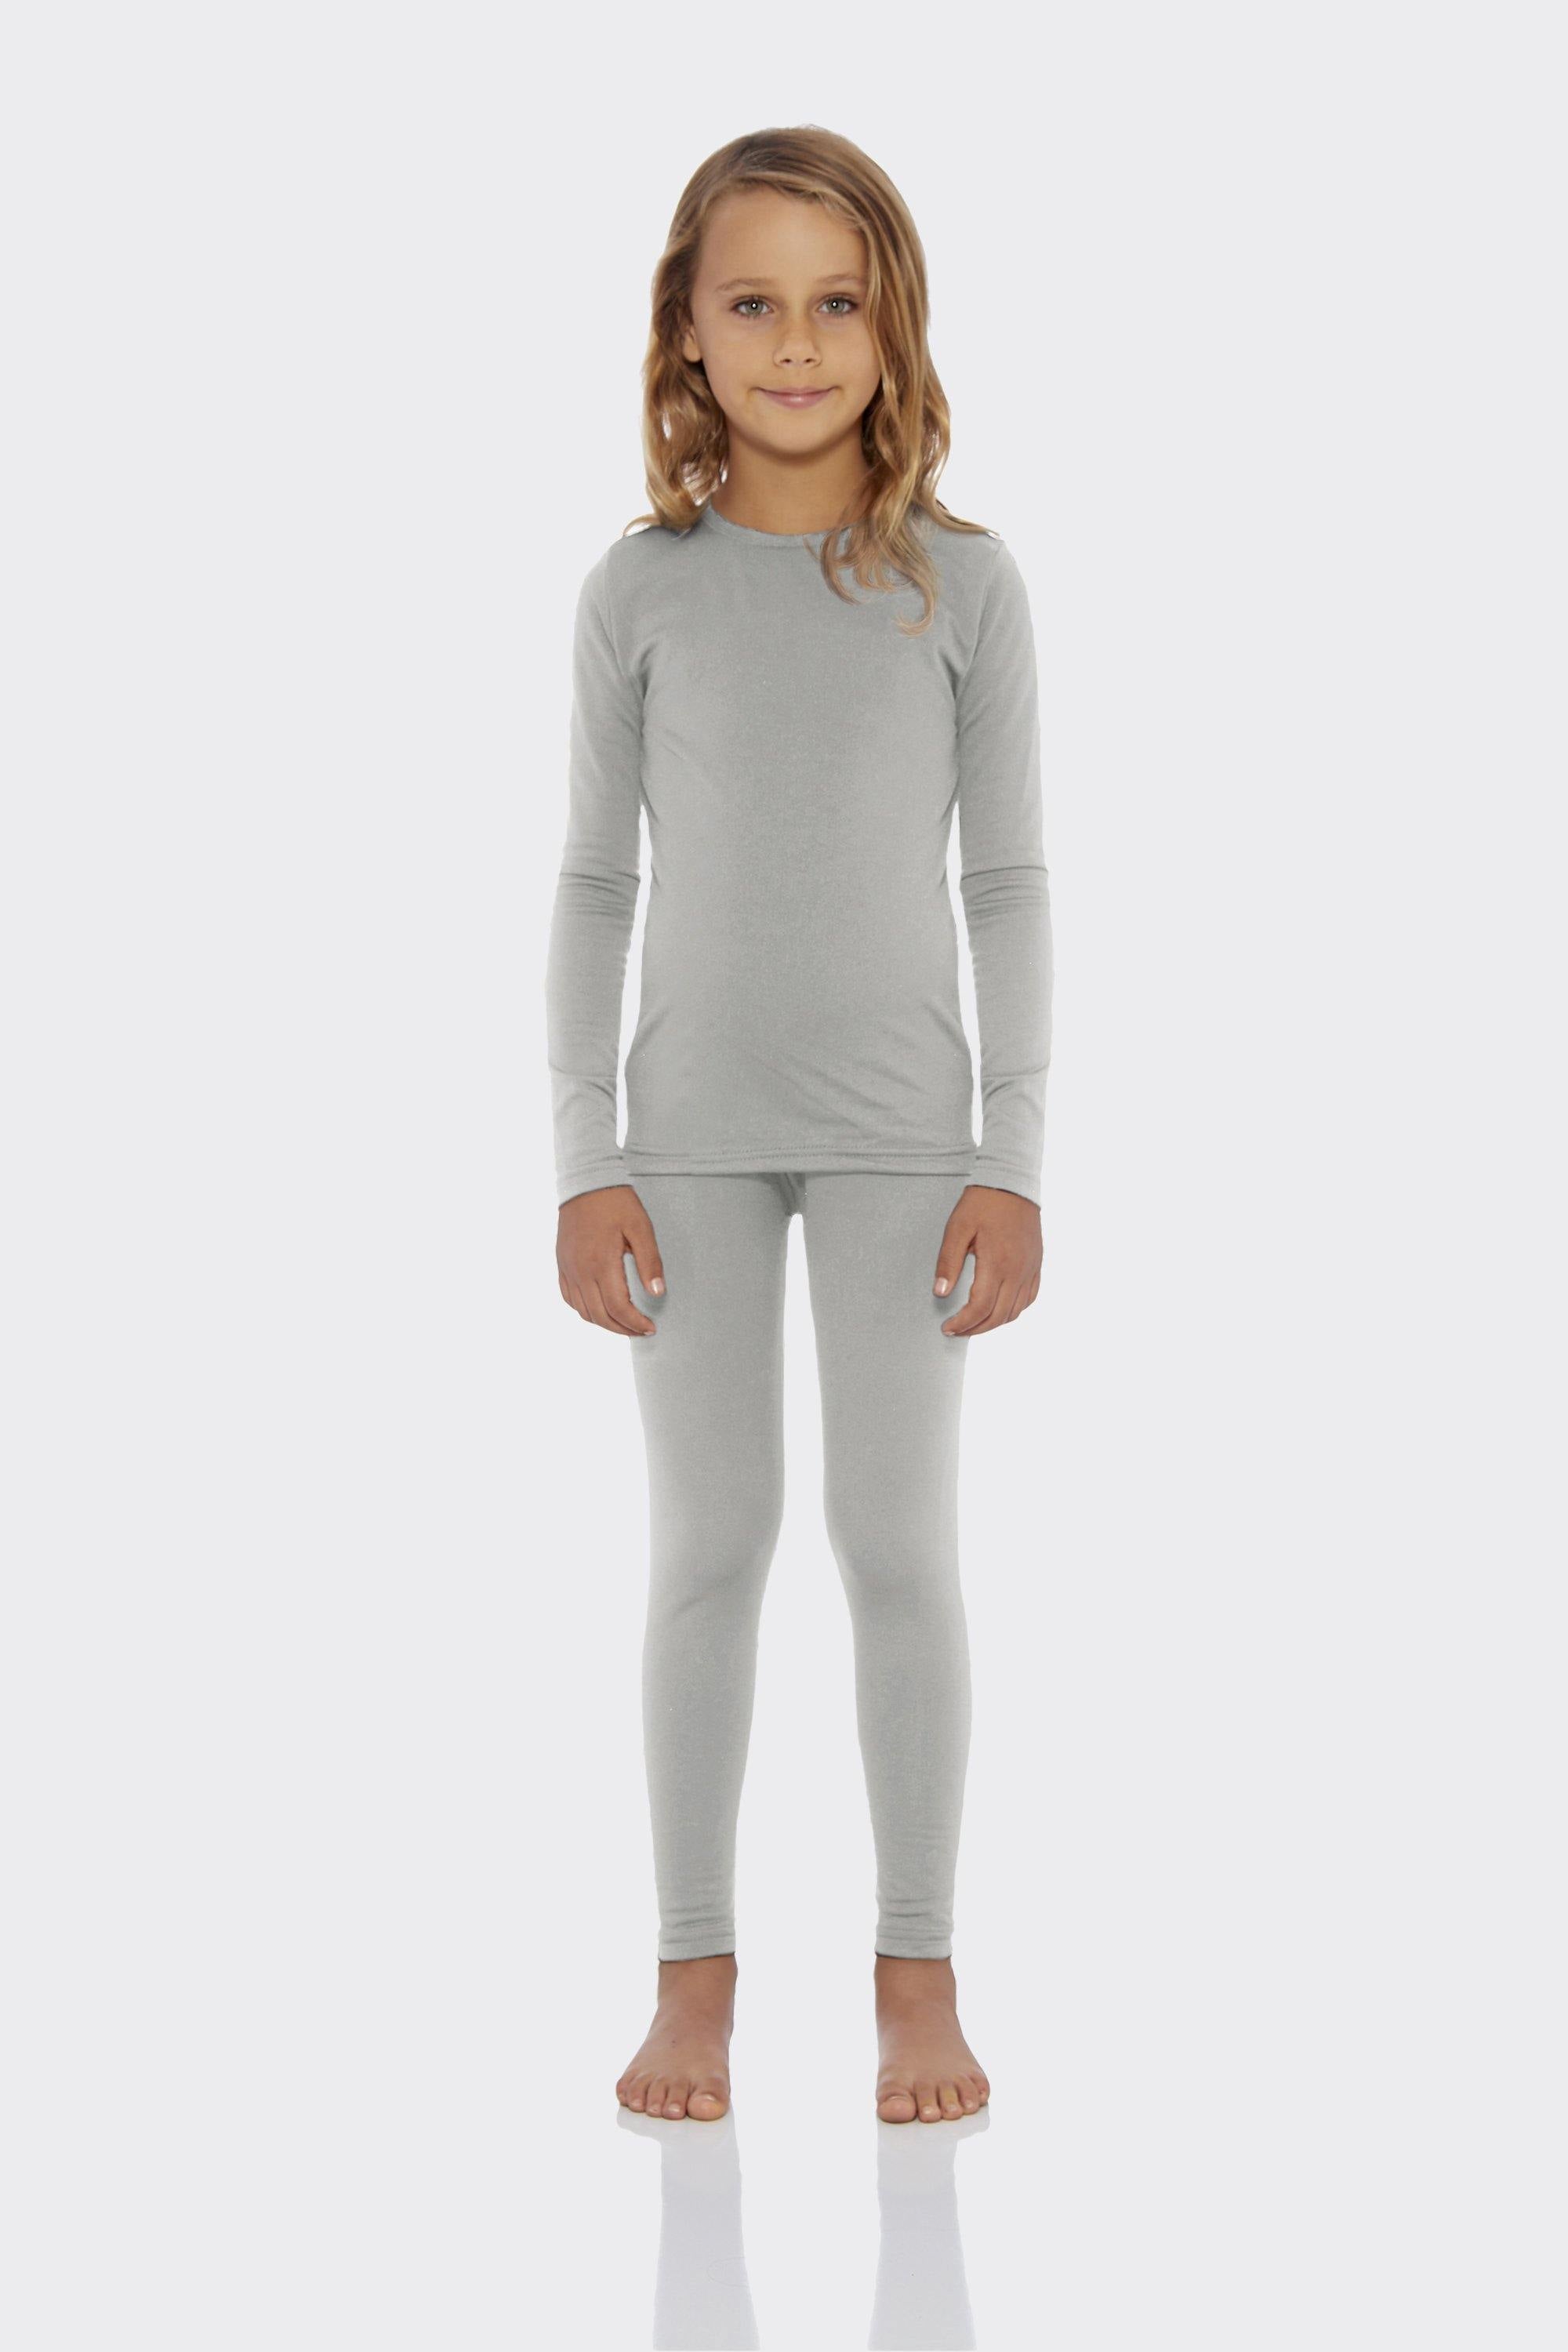 Girls Solid Thermal Set – Rocky Fashion